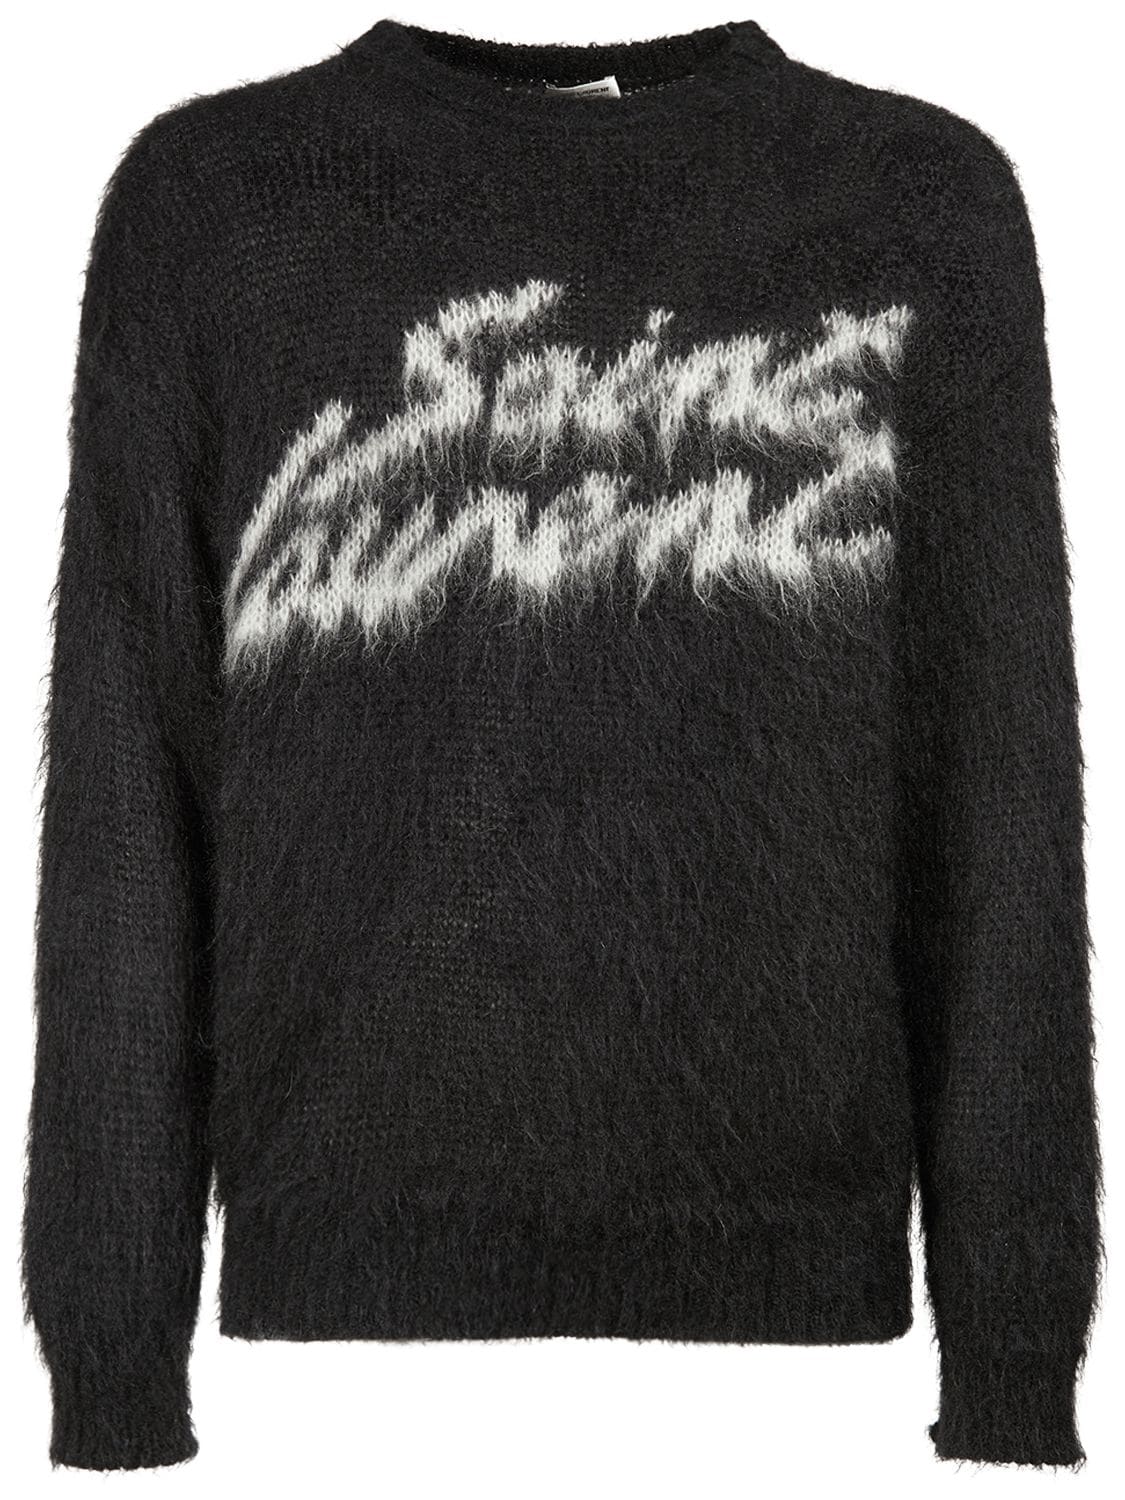 Image of Mohair Blend Sweater